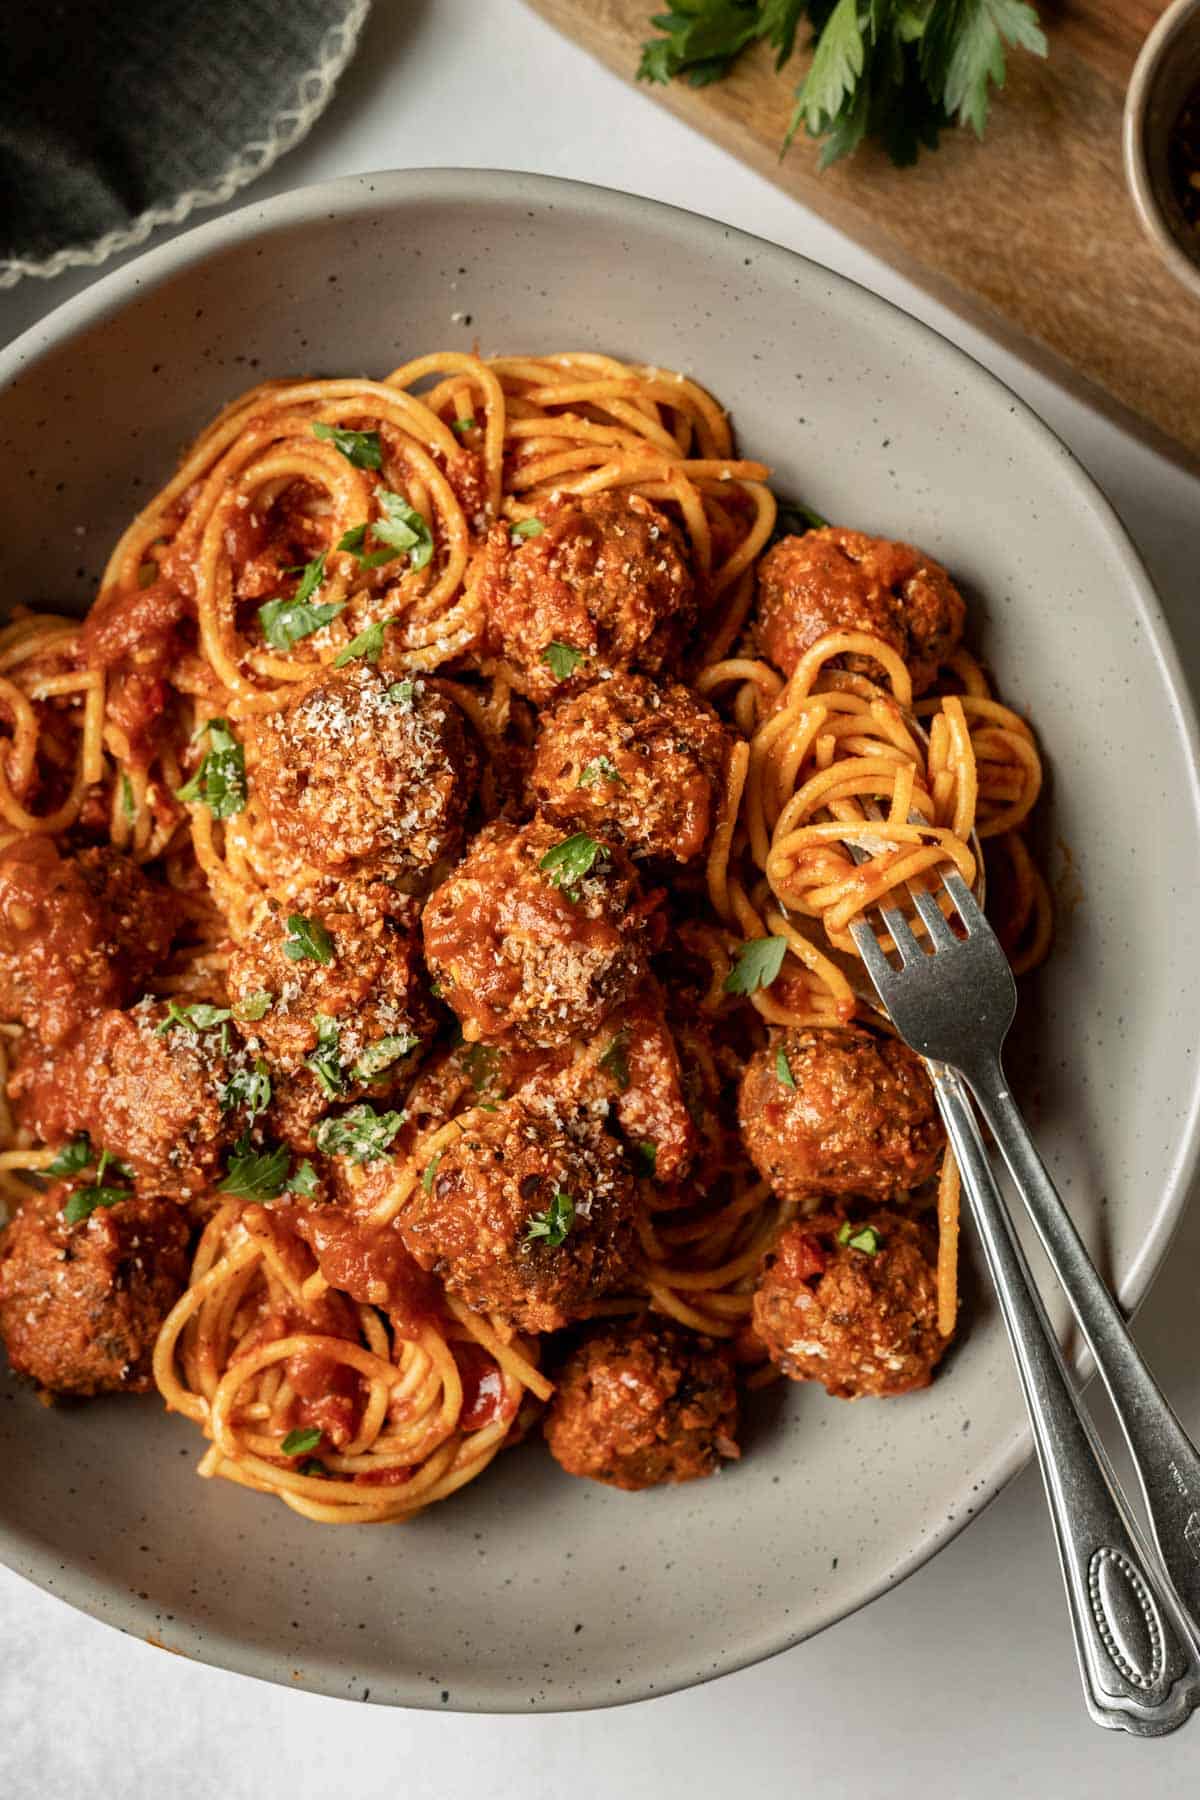 A large serving bowl filled with spaghetti, sauce, and vegan meatballs.